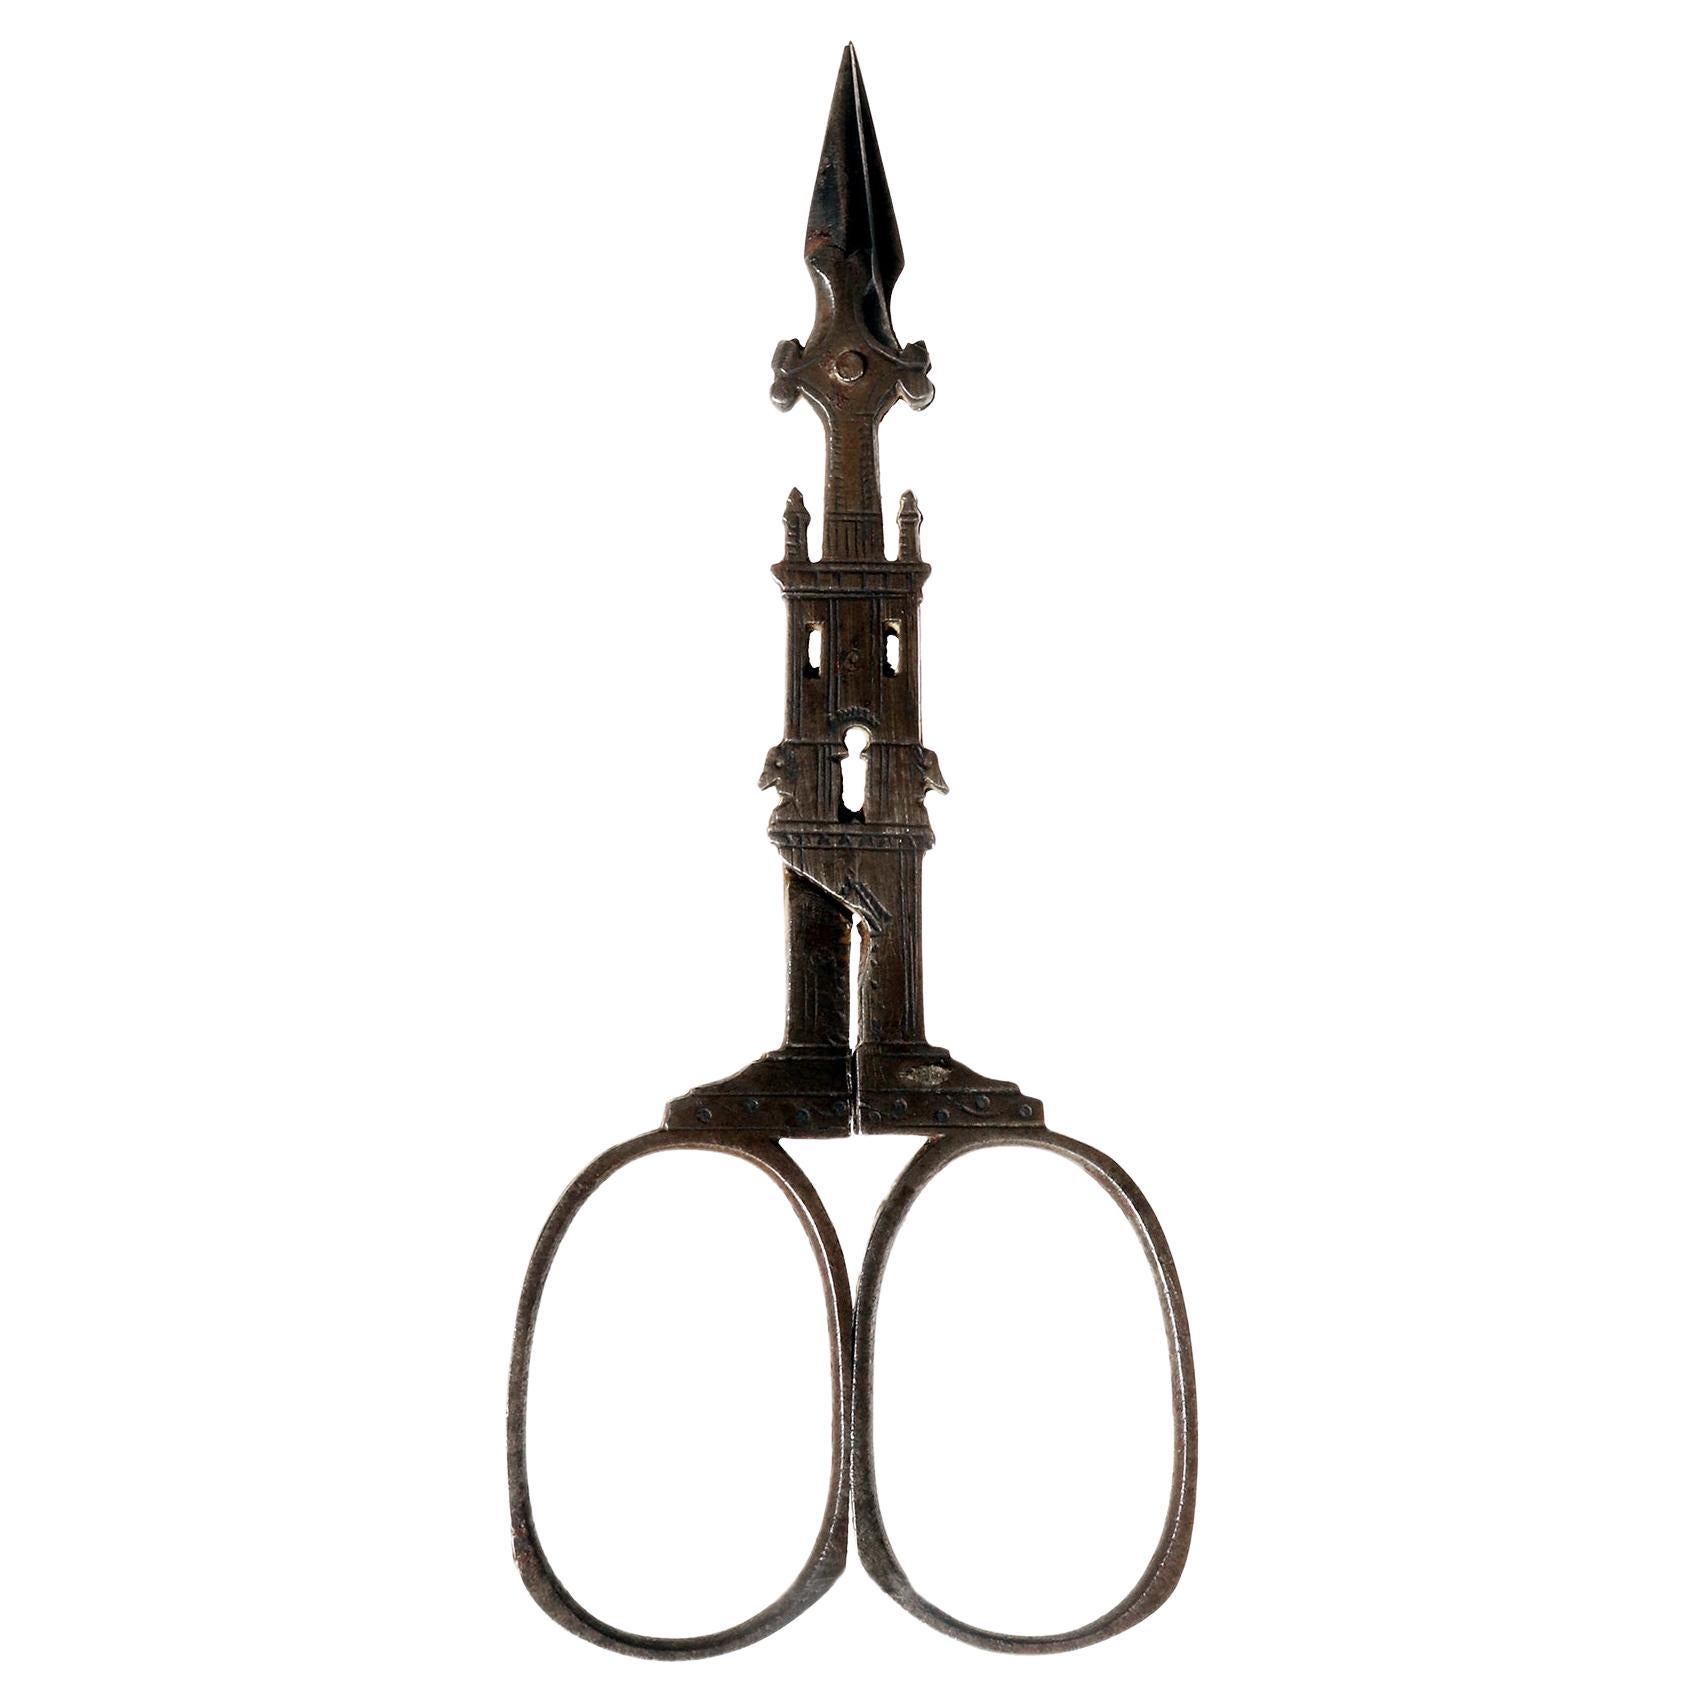 Embroidery Scissors, Iron, in the Shape of a Tower, Germany, 1840